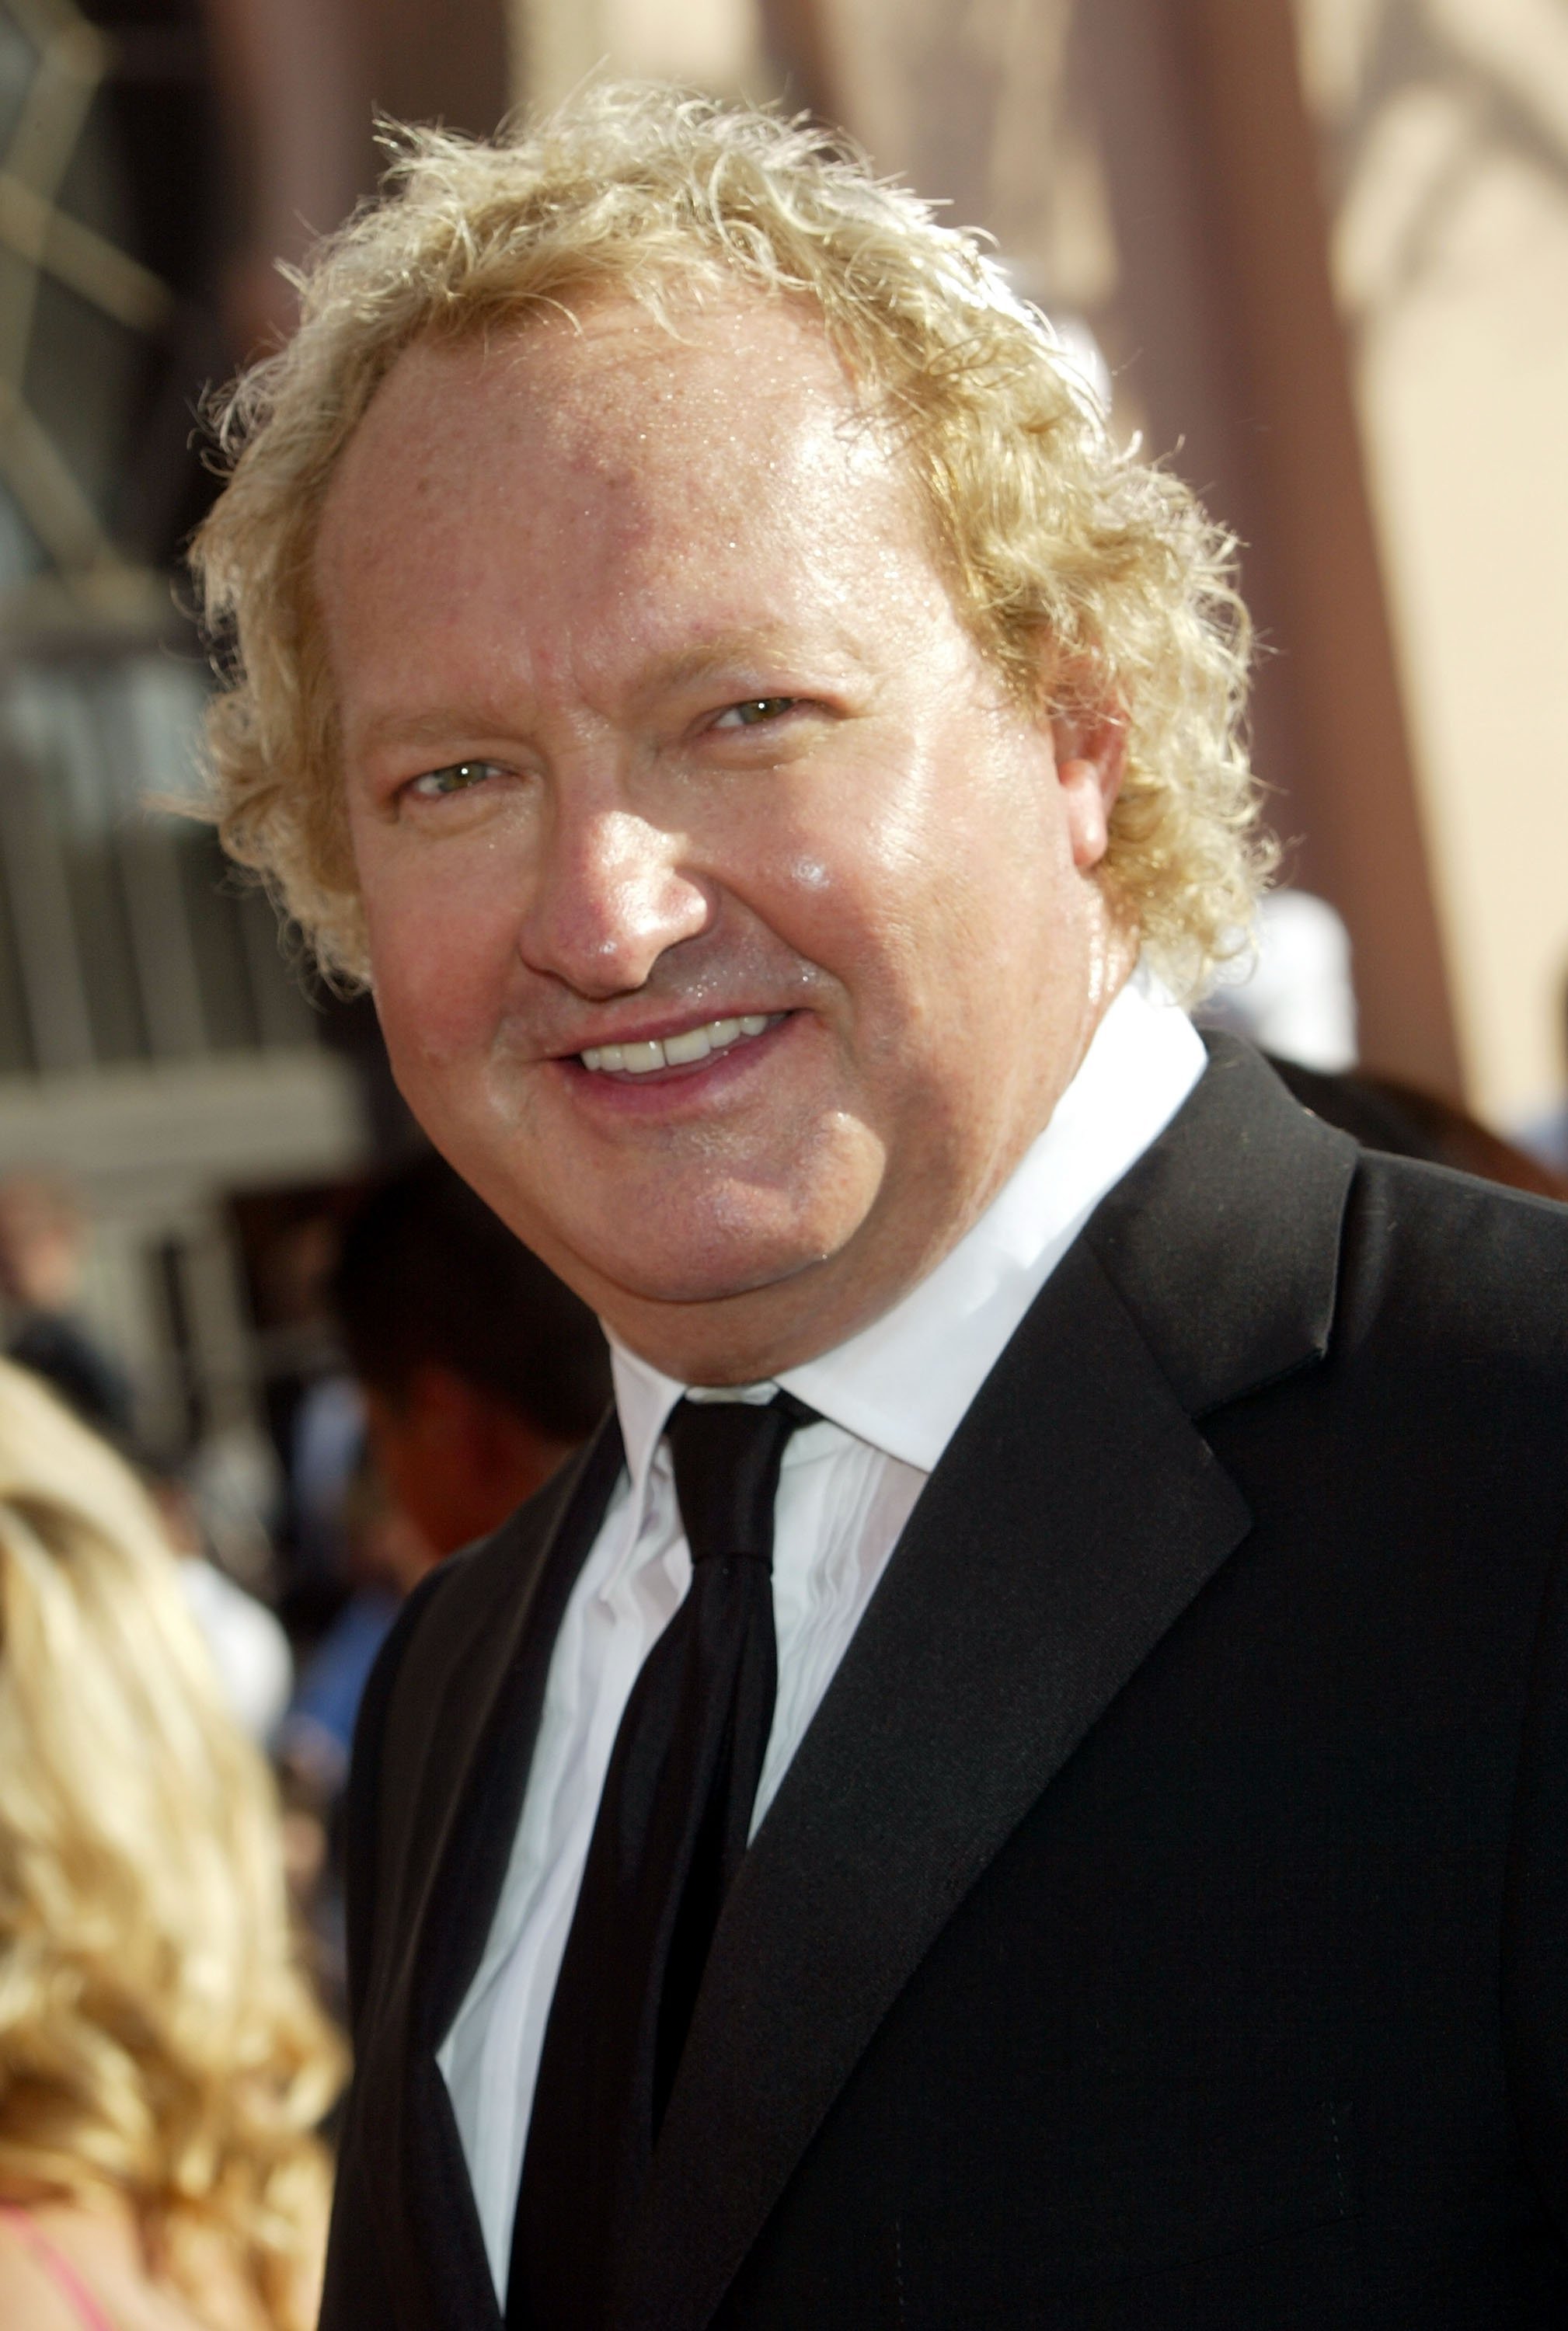 Randy Quaid arrives at the 57th Annual Emmy Awards held at the Shrine Auditorium on September 18, 2005, in Los Angeles, California. | Source: Getty Images.